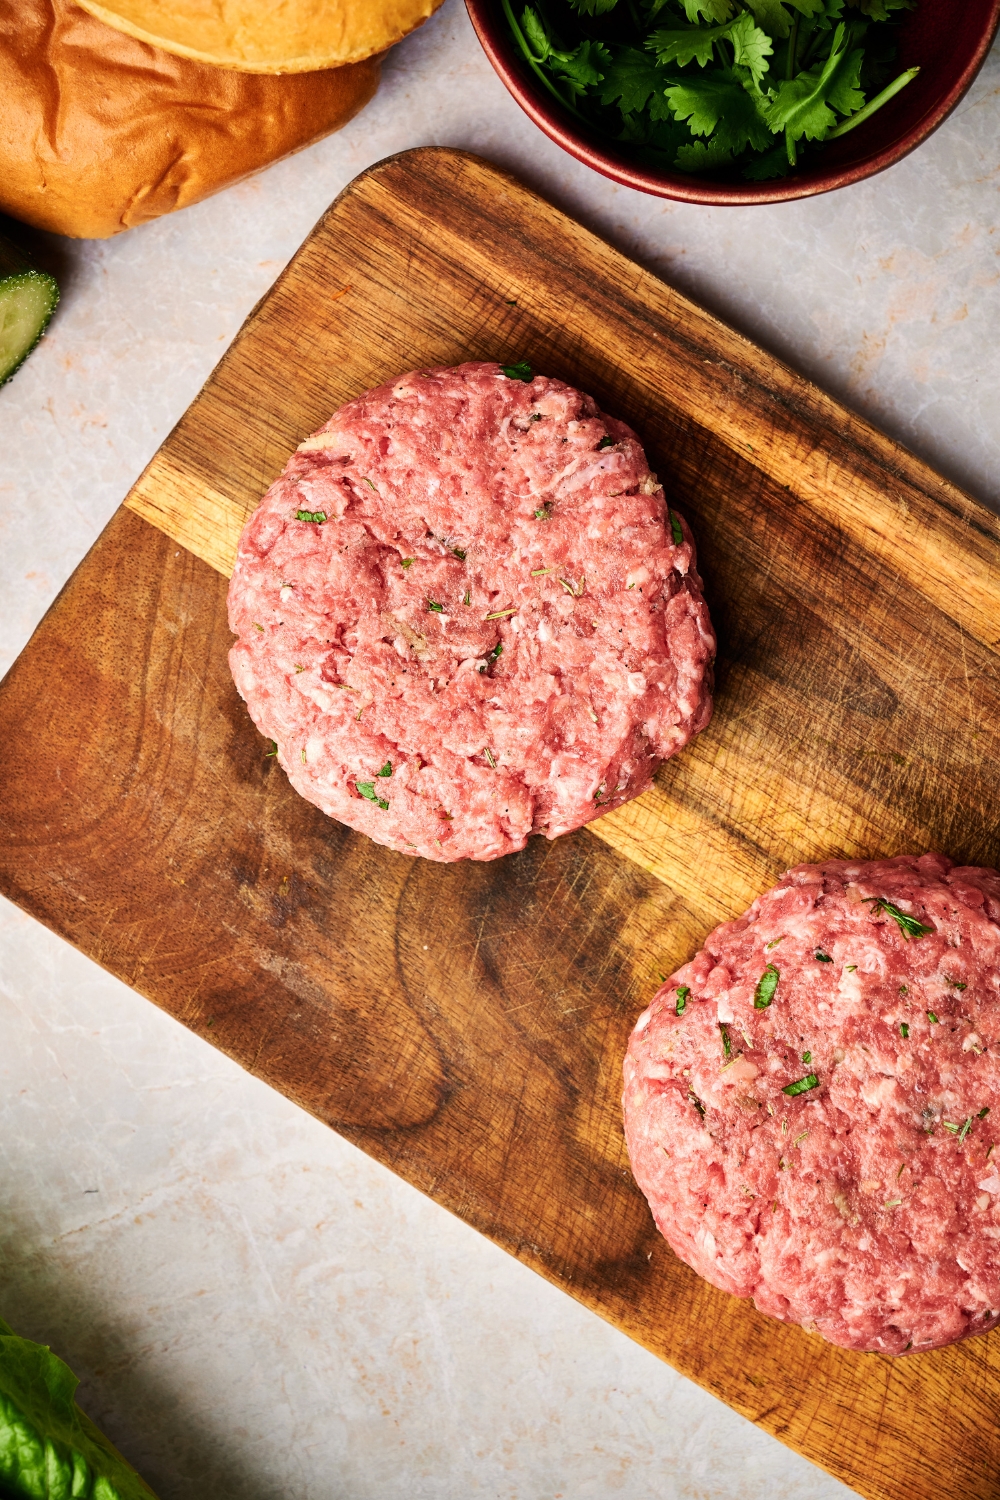 Two patties of raw lamb are formed into circles on a wooden cutting board.